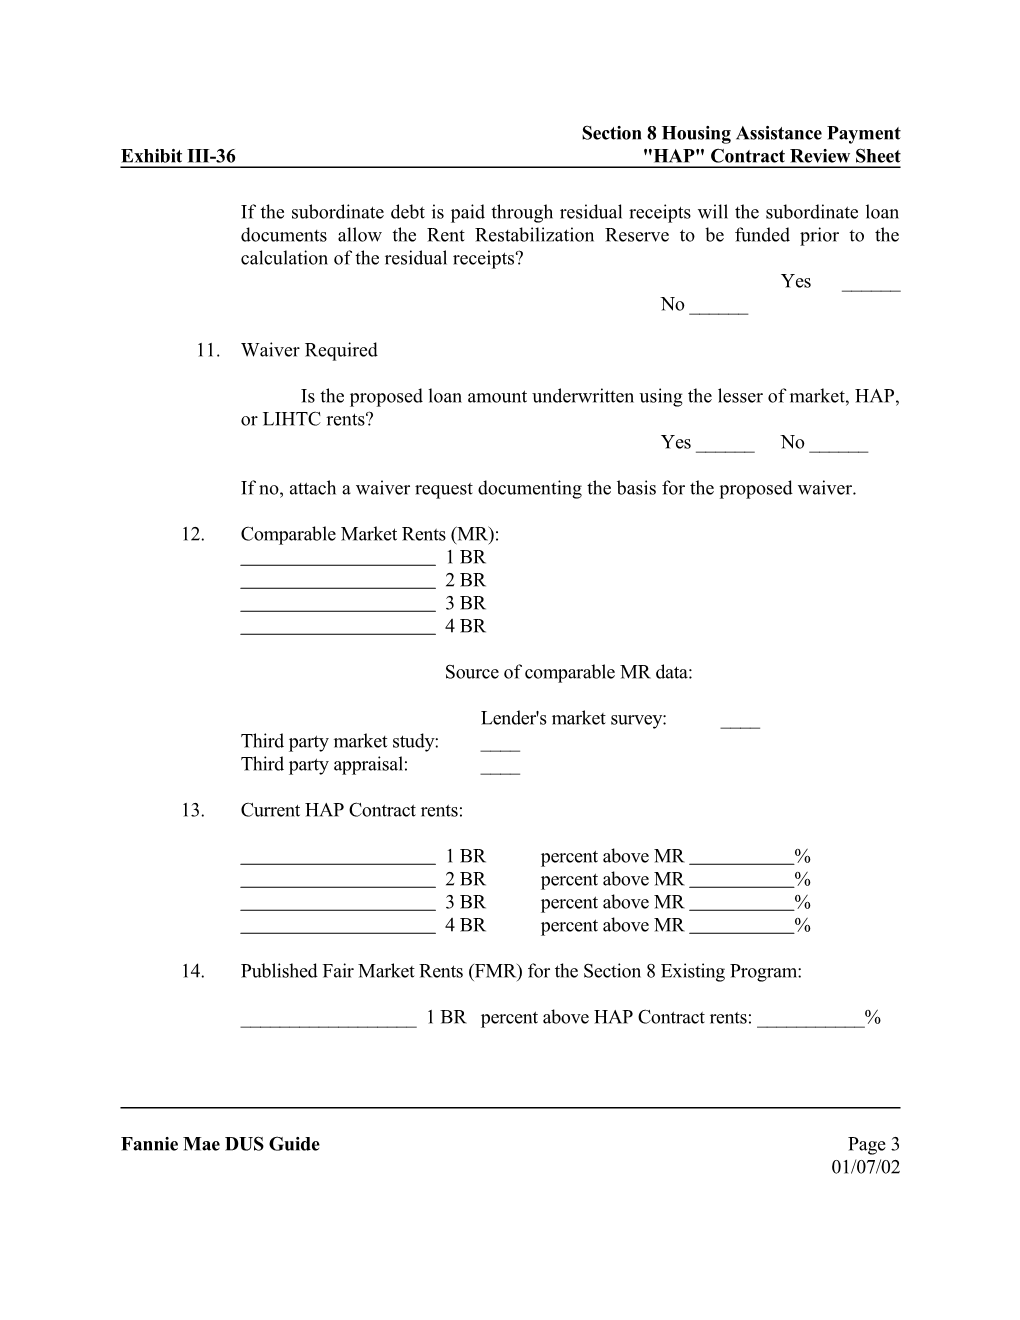 Section 8 Housing Assistance Payment HAP Contract Review Sheet